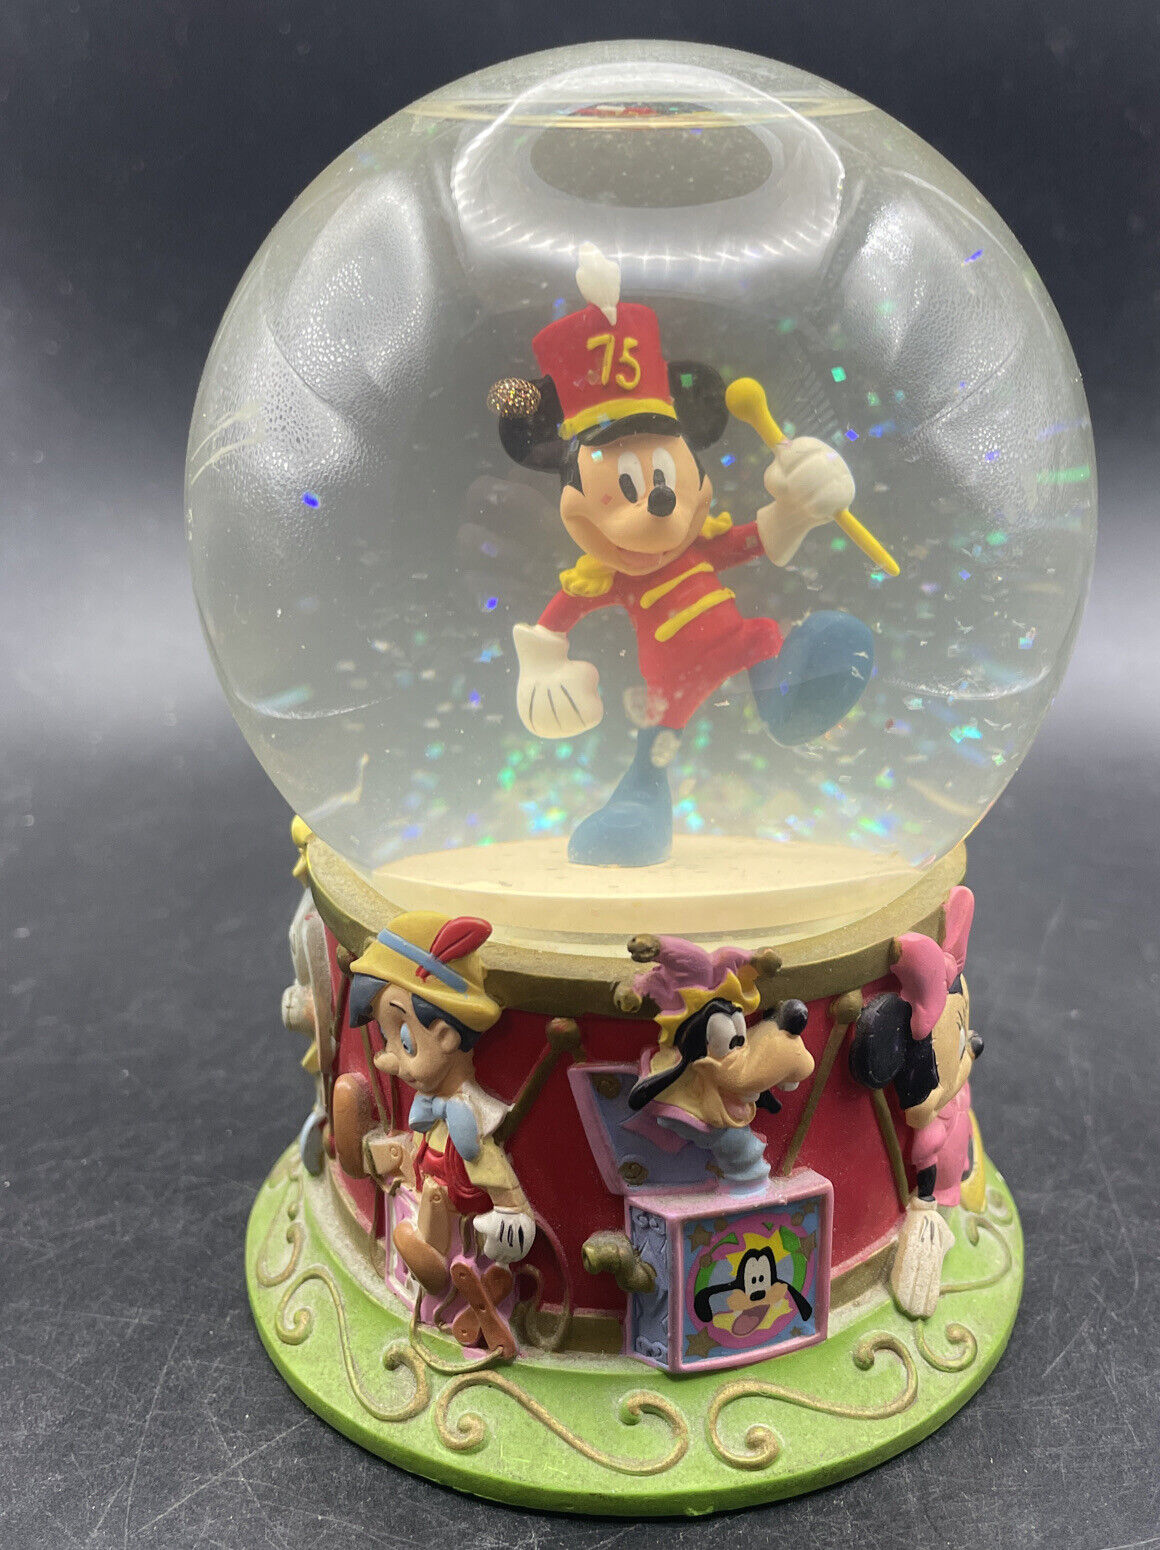 DISNEY STORE Snow Globe Mickey Mouse Marching Band 75th Anniversary 5” Tall 